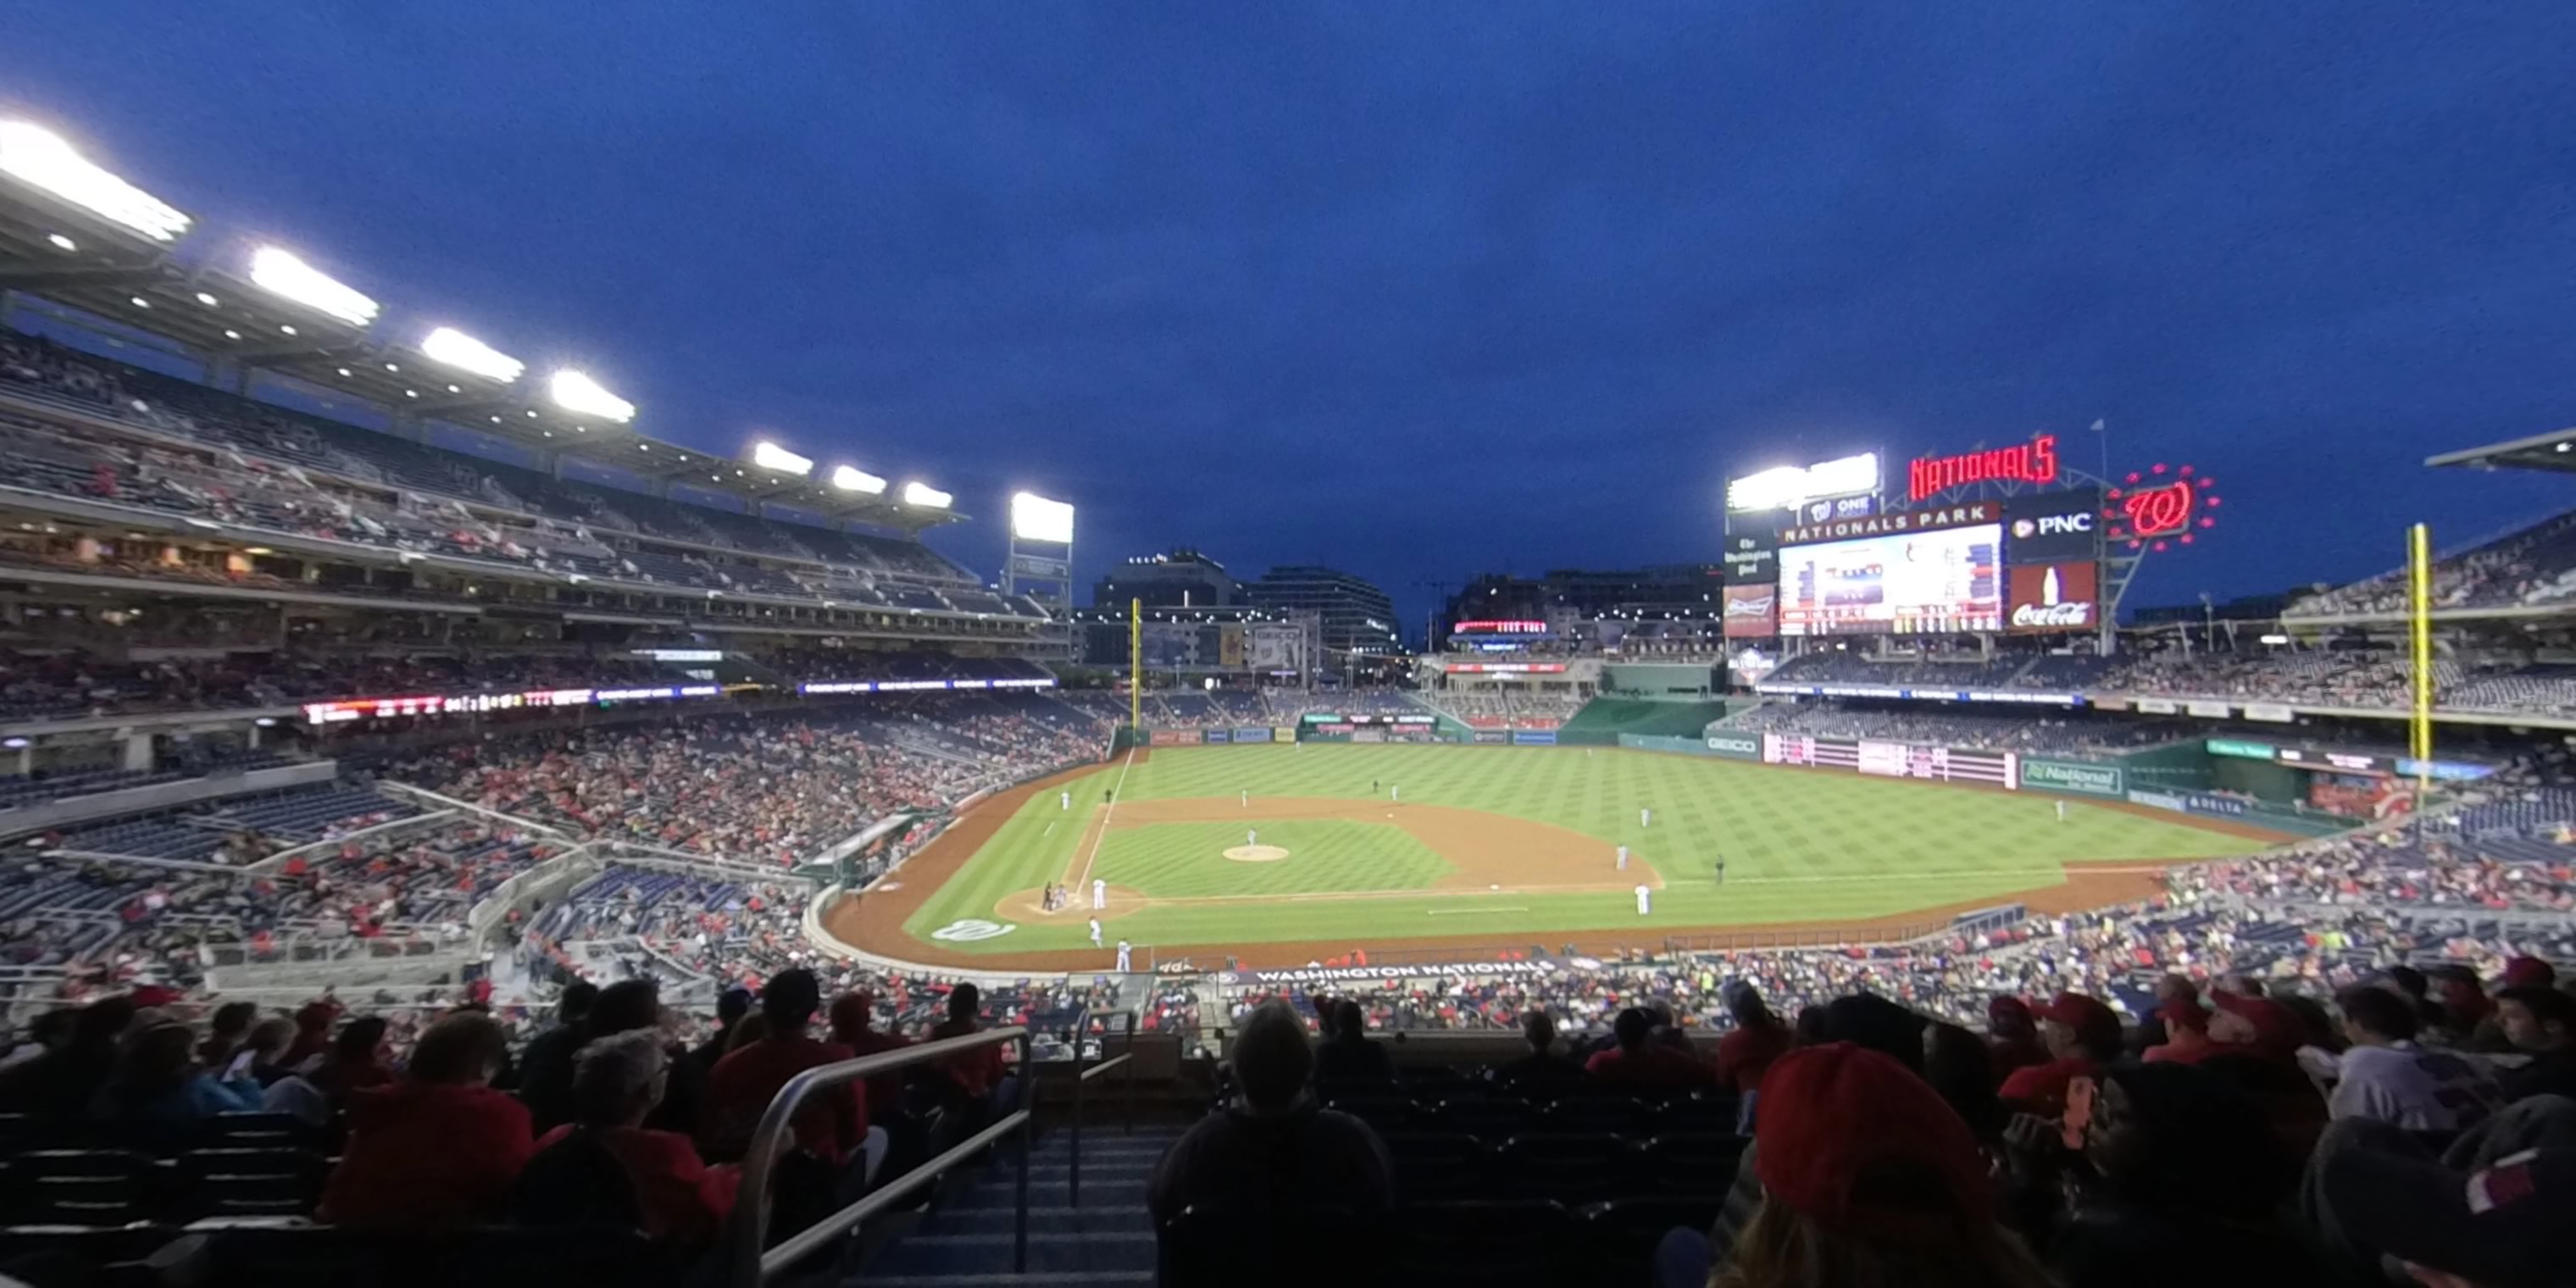 section 218 panoramic seat view  for baseball - nationals park